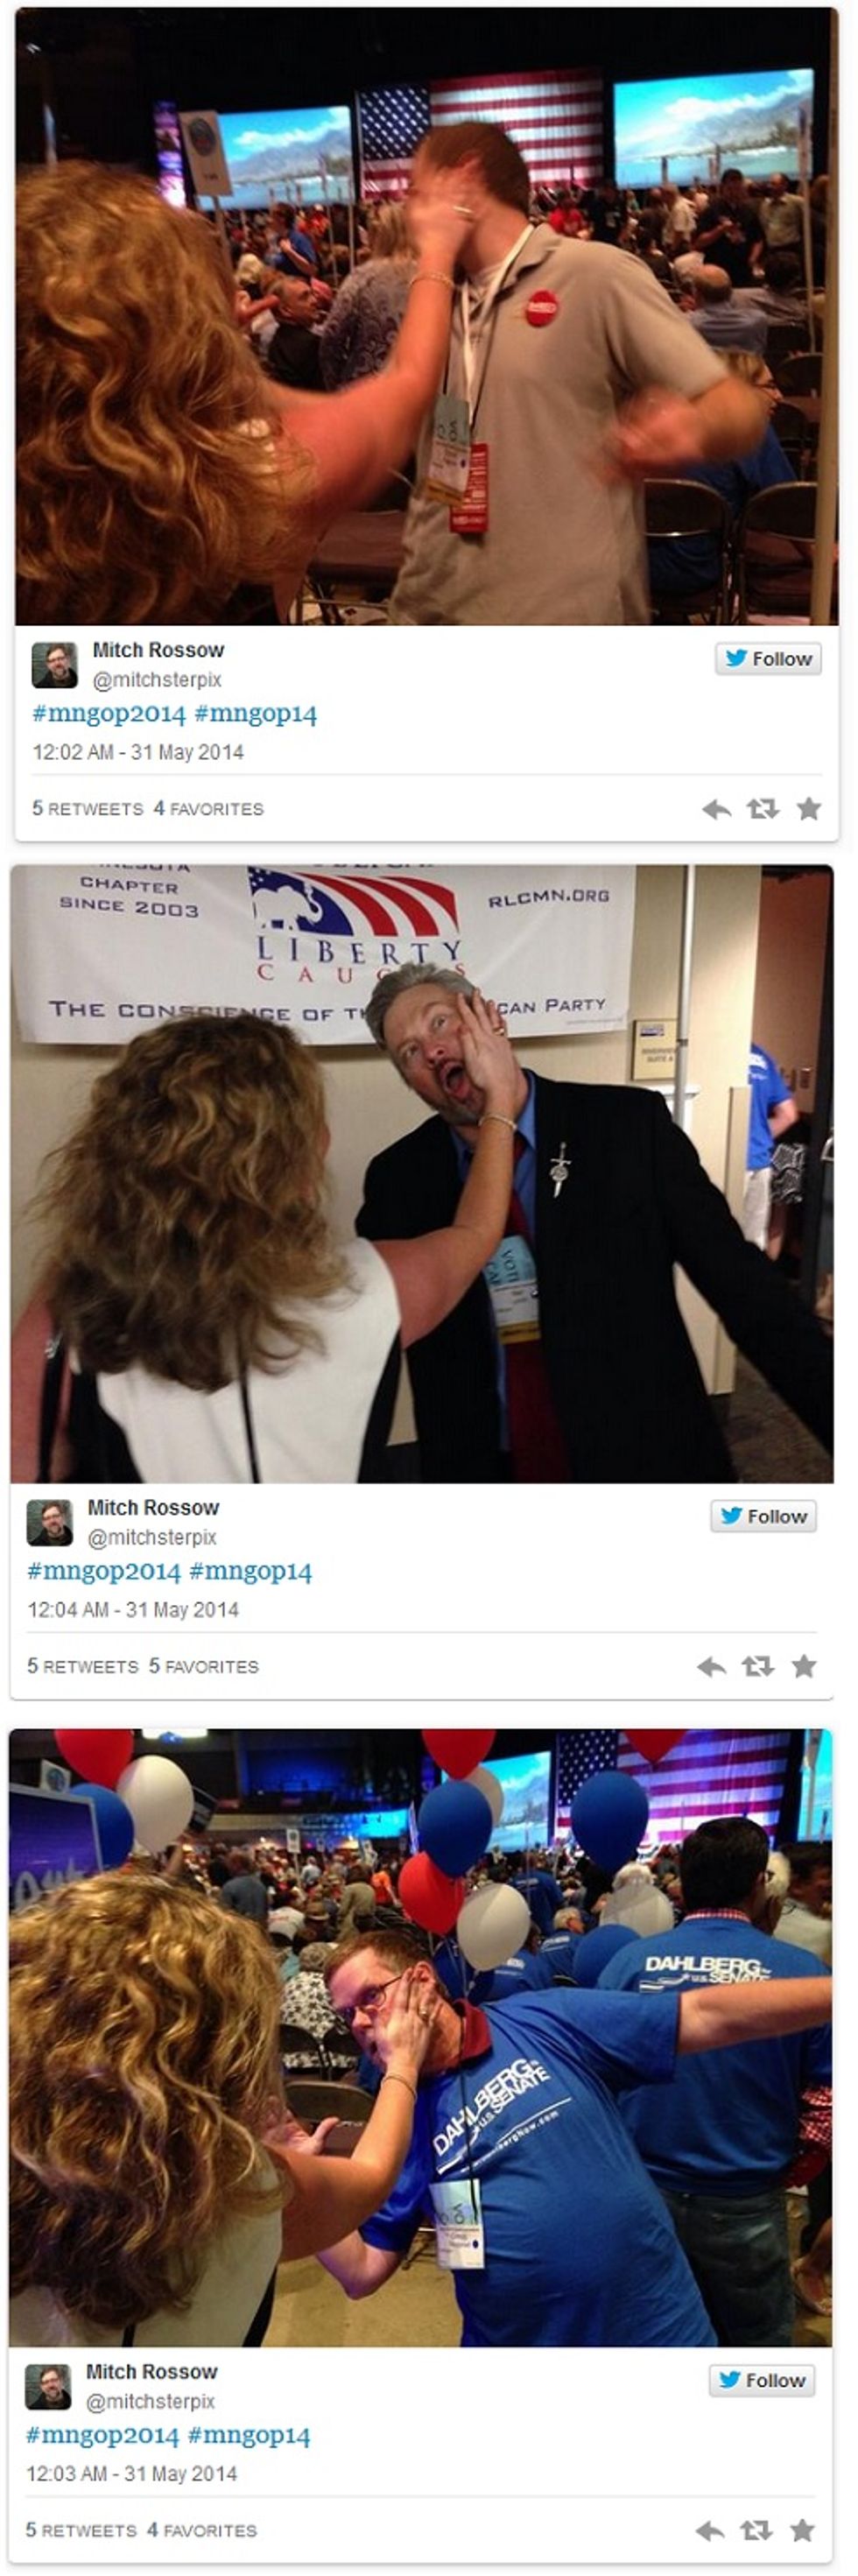 Former Bachmann Aide Has Satisfying New Career Losing Campaigns, Slapping People